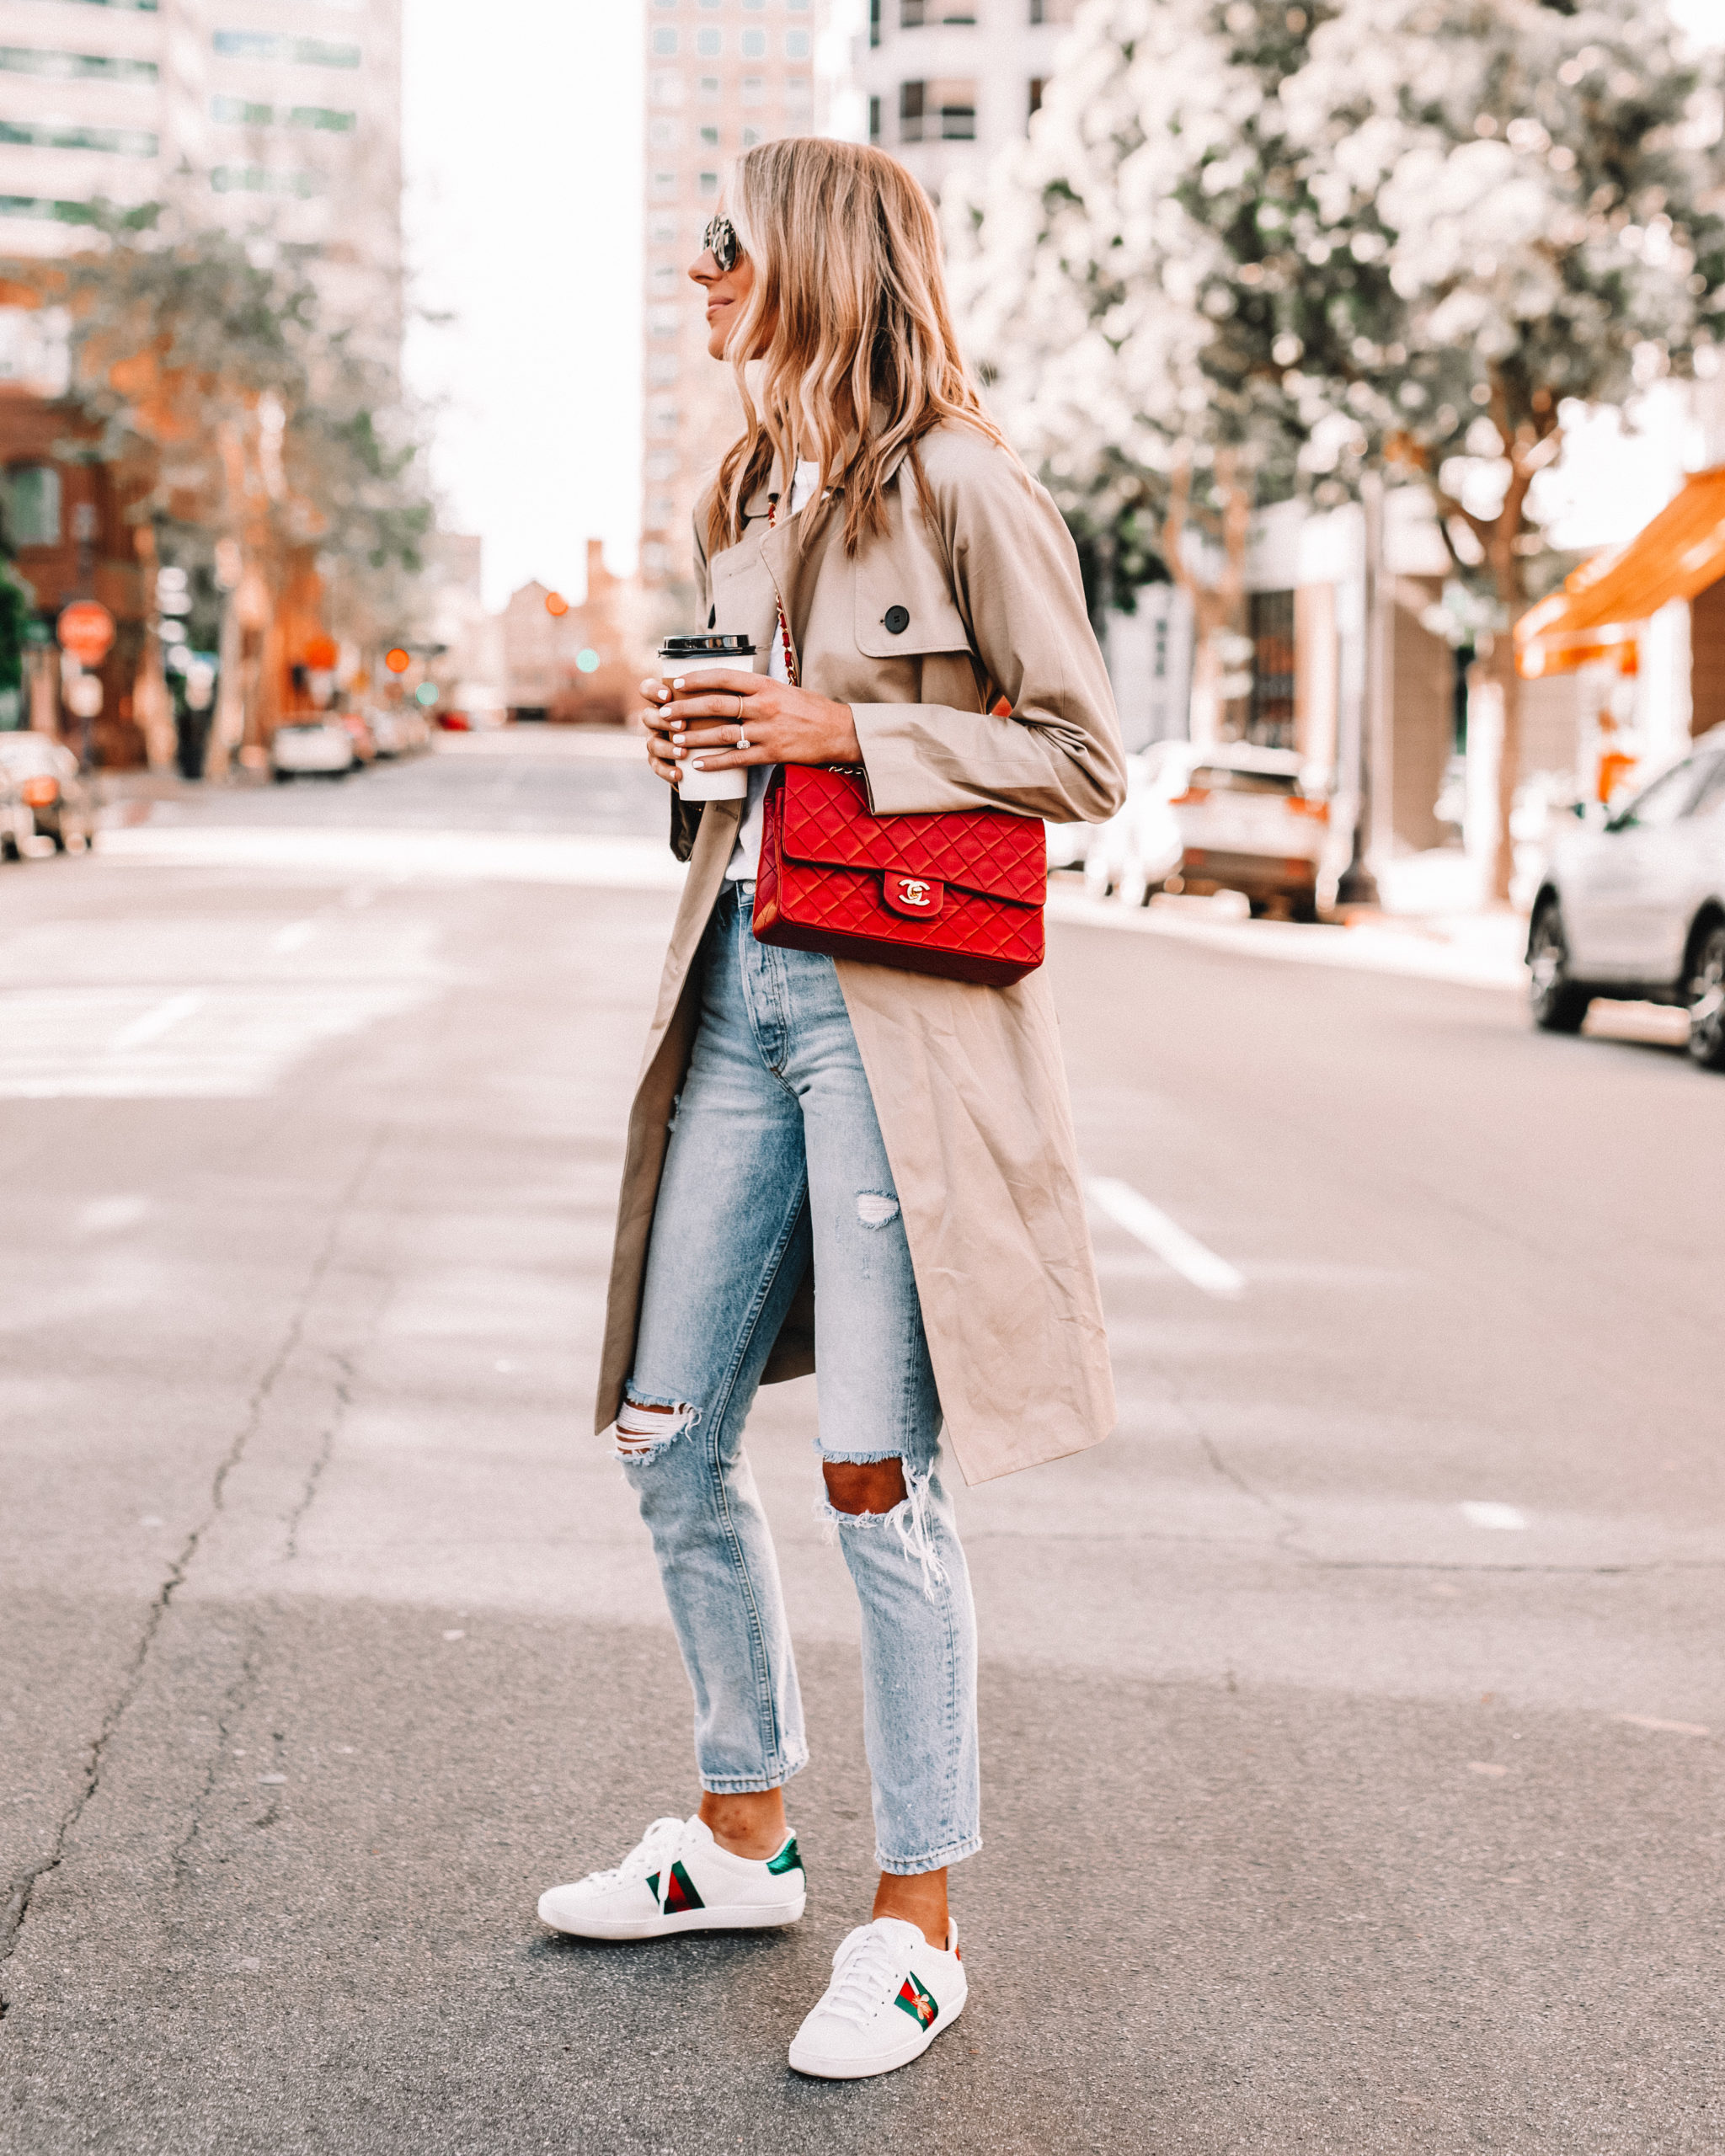 An Effortless Way to Wear Red this Holiday Season - Fashion Jackson